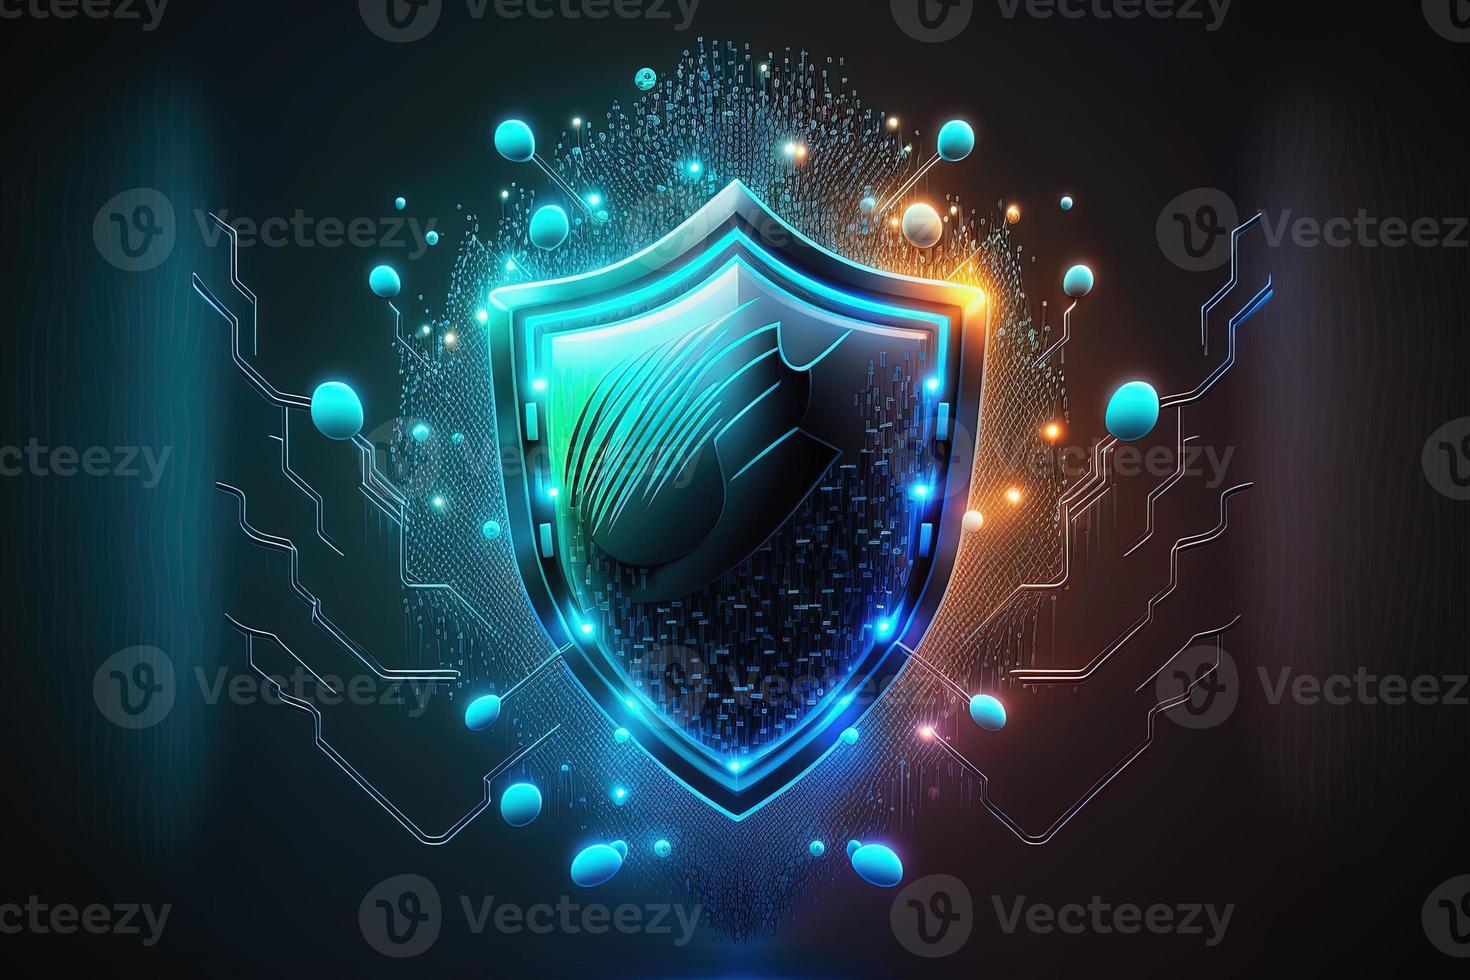 Neon data with security shield. Concept of protection, cyper safety. AI photo